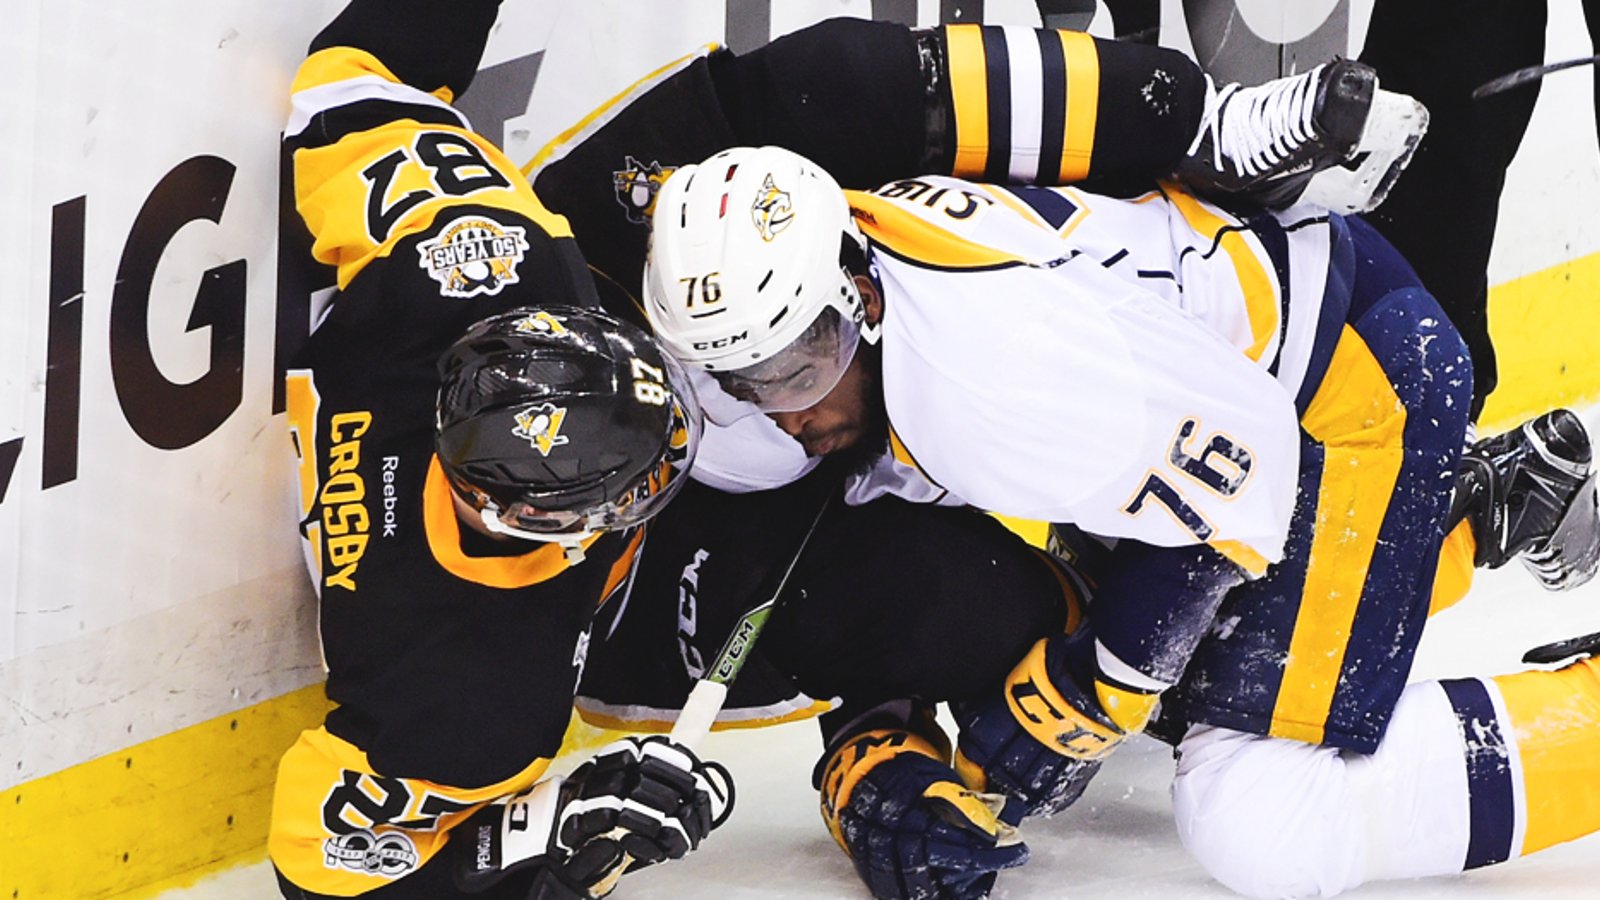 Sidney Crosby reveals why he punched P.K. Subban in the head multiple times in game 5.